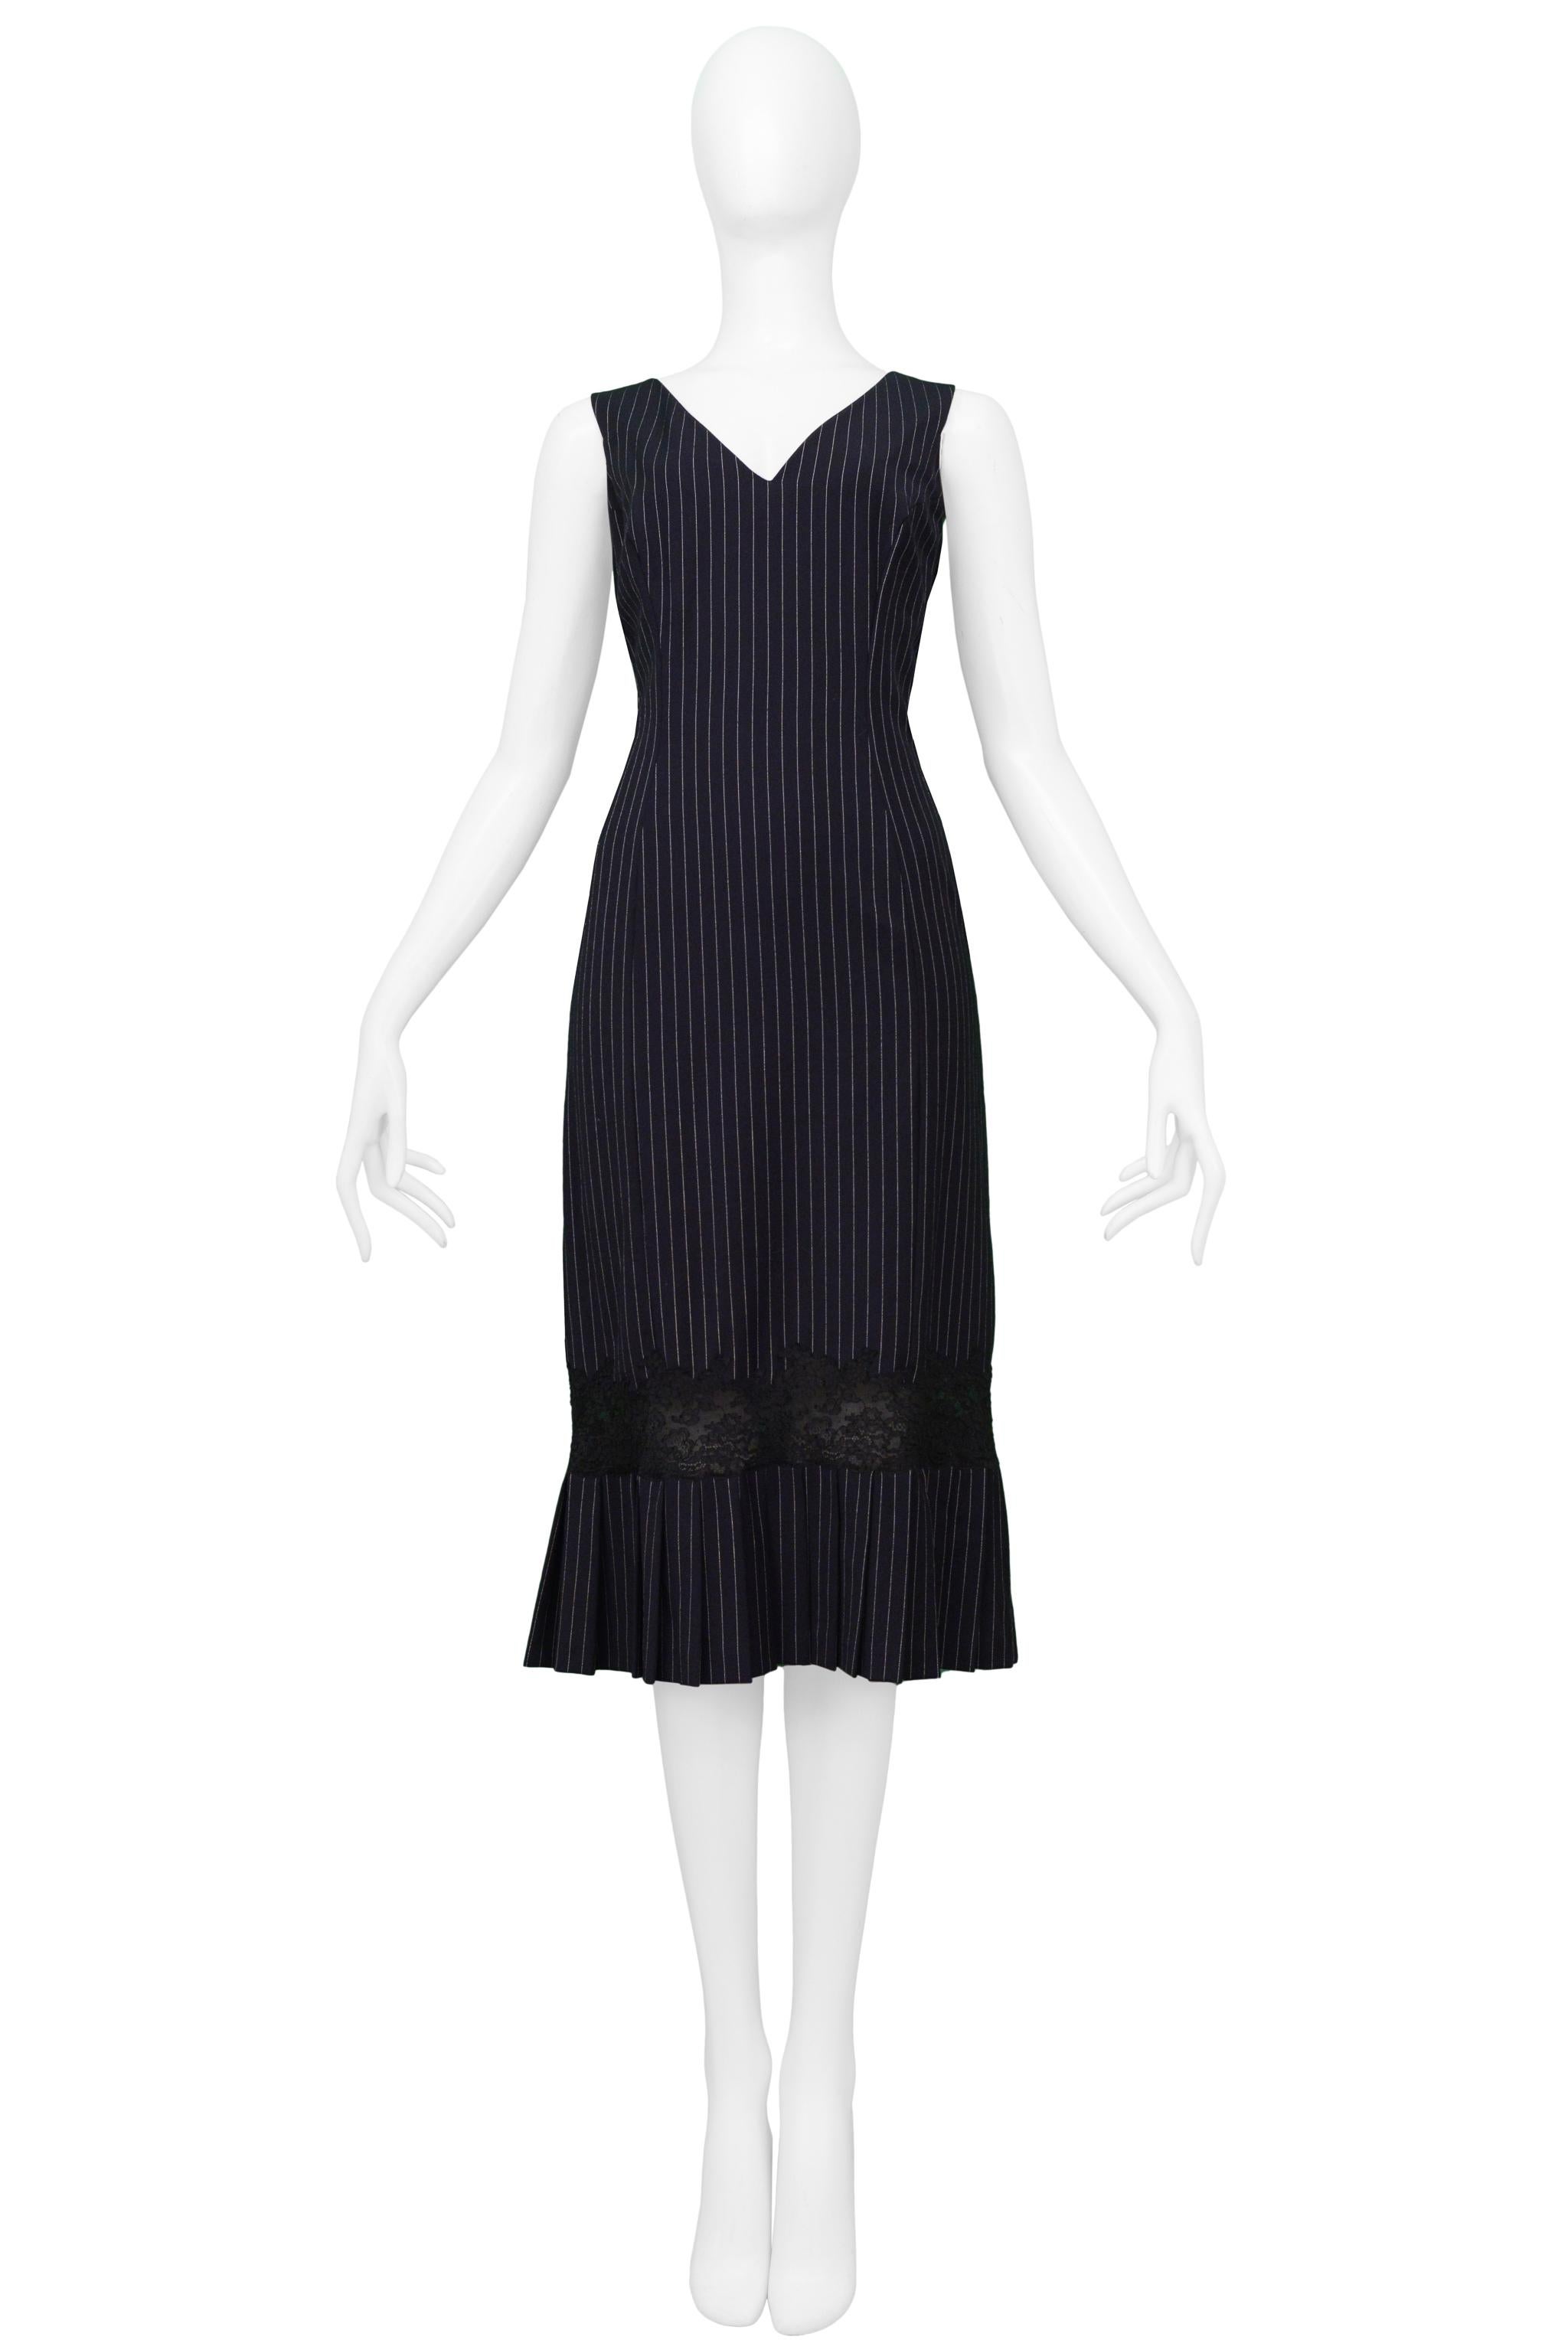 Resurrection is excited to offer a vintage John Galliano navy blue wool dress with pinstripes featuring a V front and back neckline, sleeveless, and pleated hem with lace detail.

John Galliano
Size 42
Wool and Lace 
Excellent Vintage